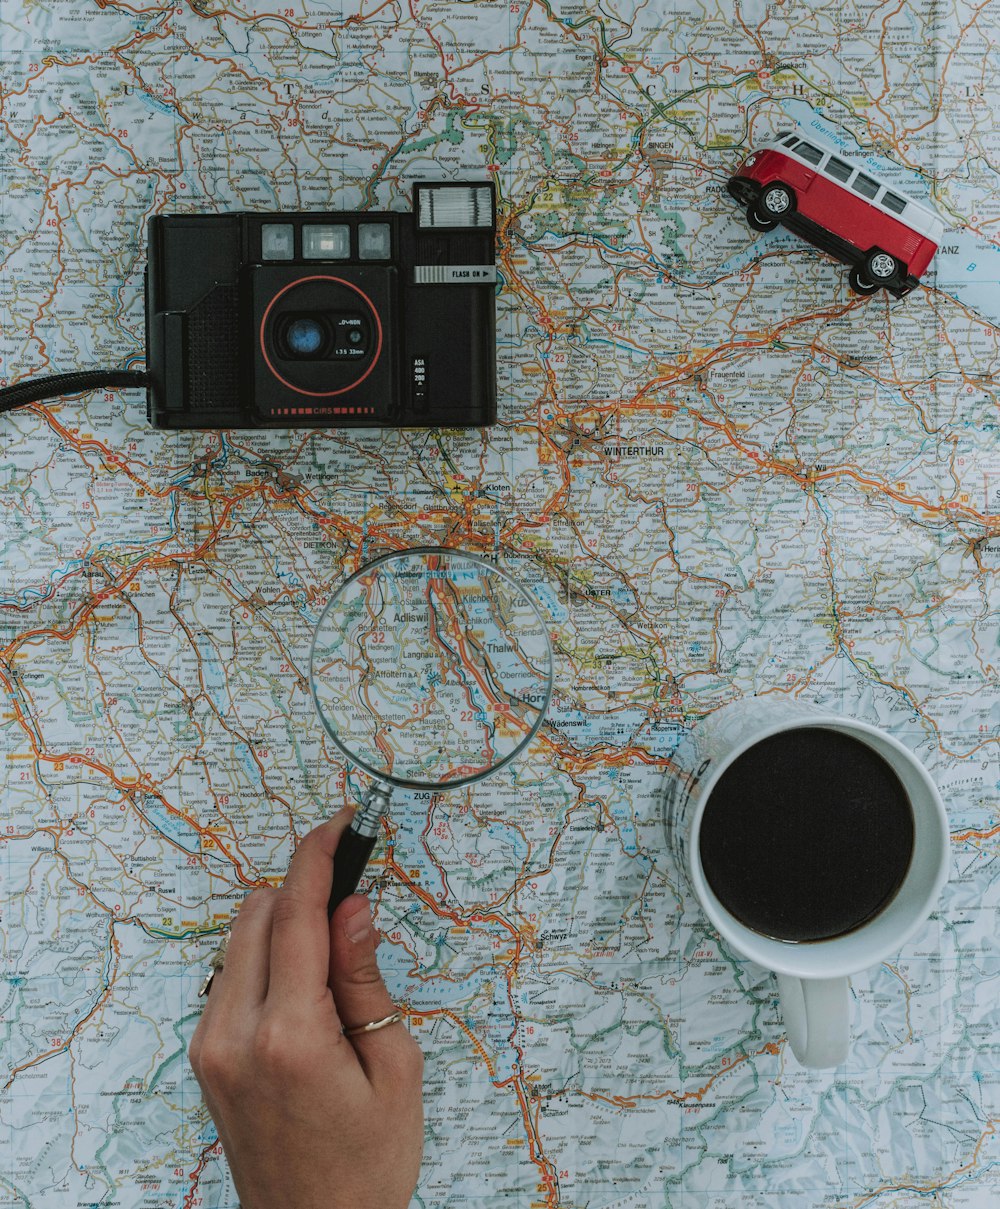 person holding magnifying glass beside black film camera white ceramic mug filled with black liquid near vehicle toy scale model